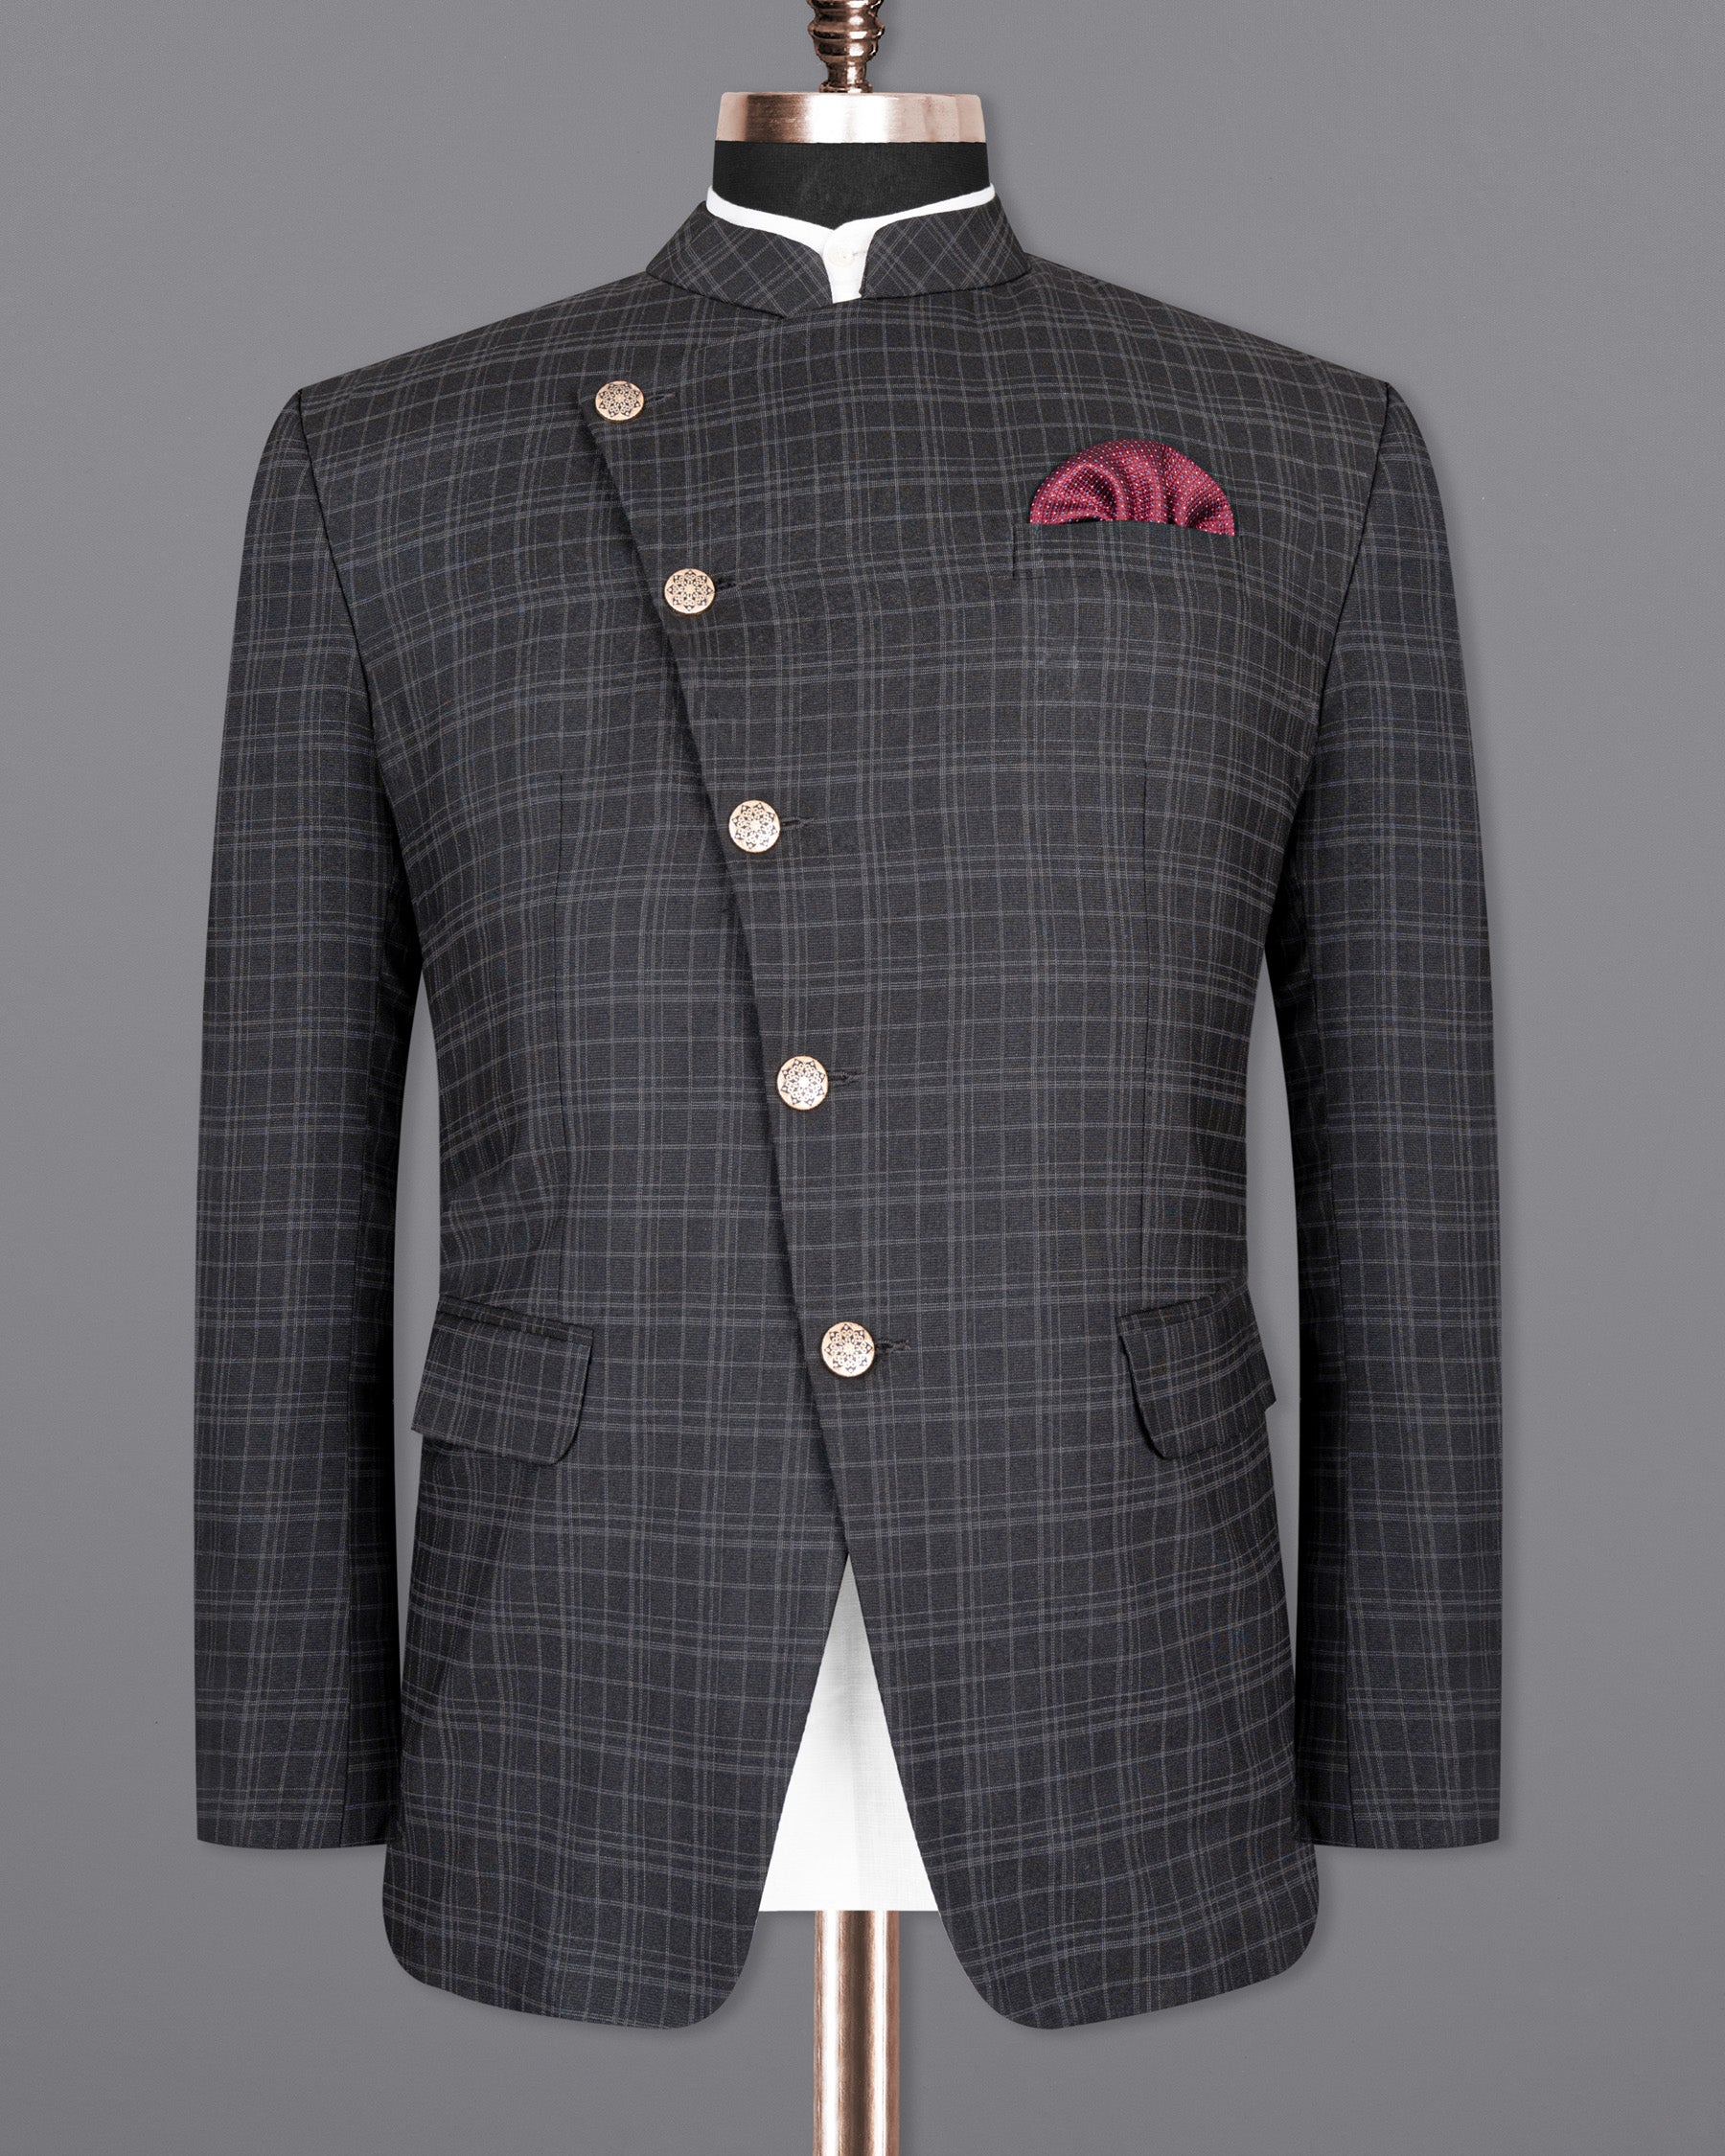 Star Dust and Shark Grey Plaid Cross Placket Bandhgala Wool rich Suit